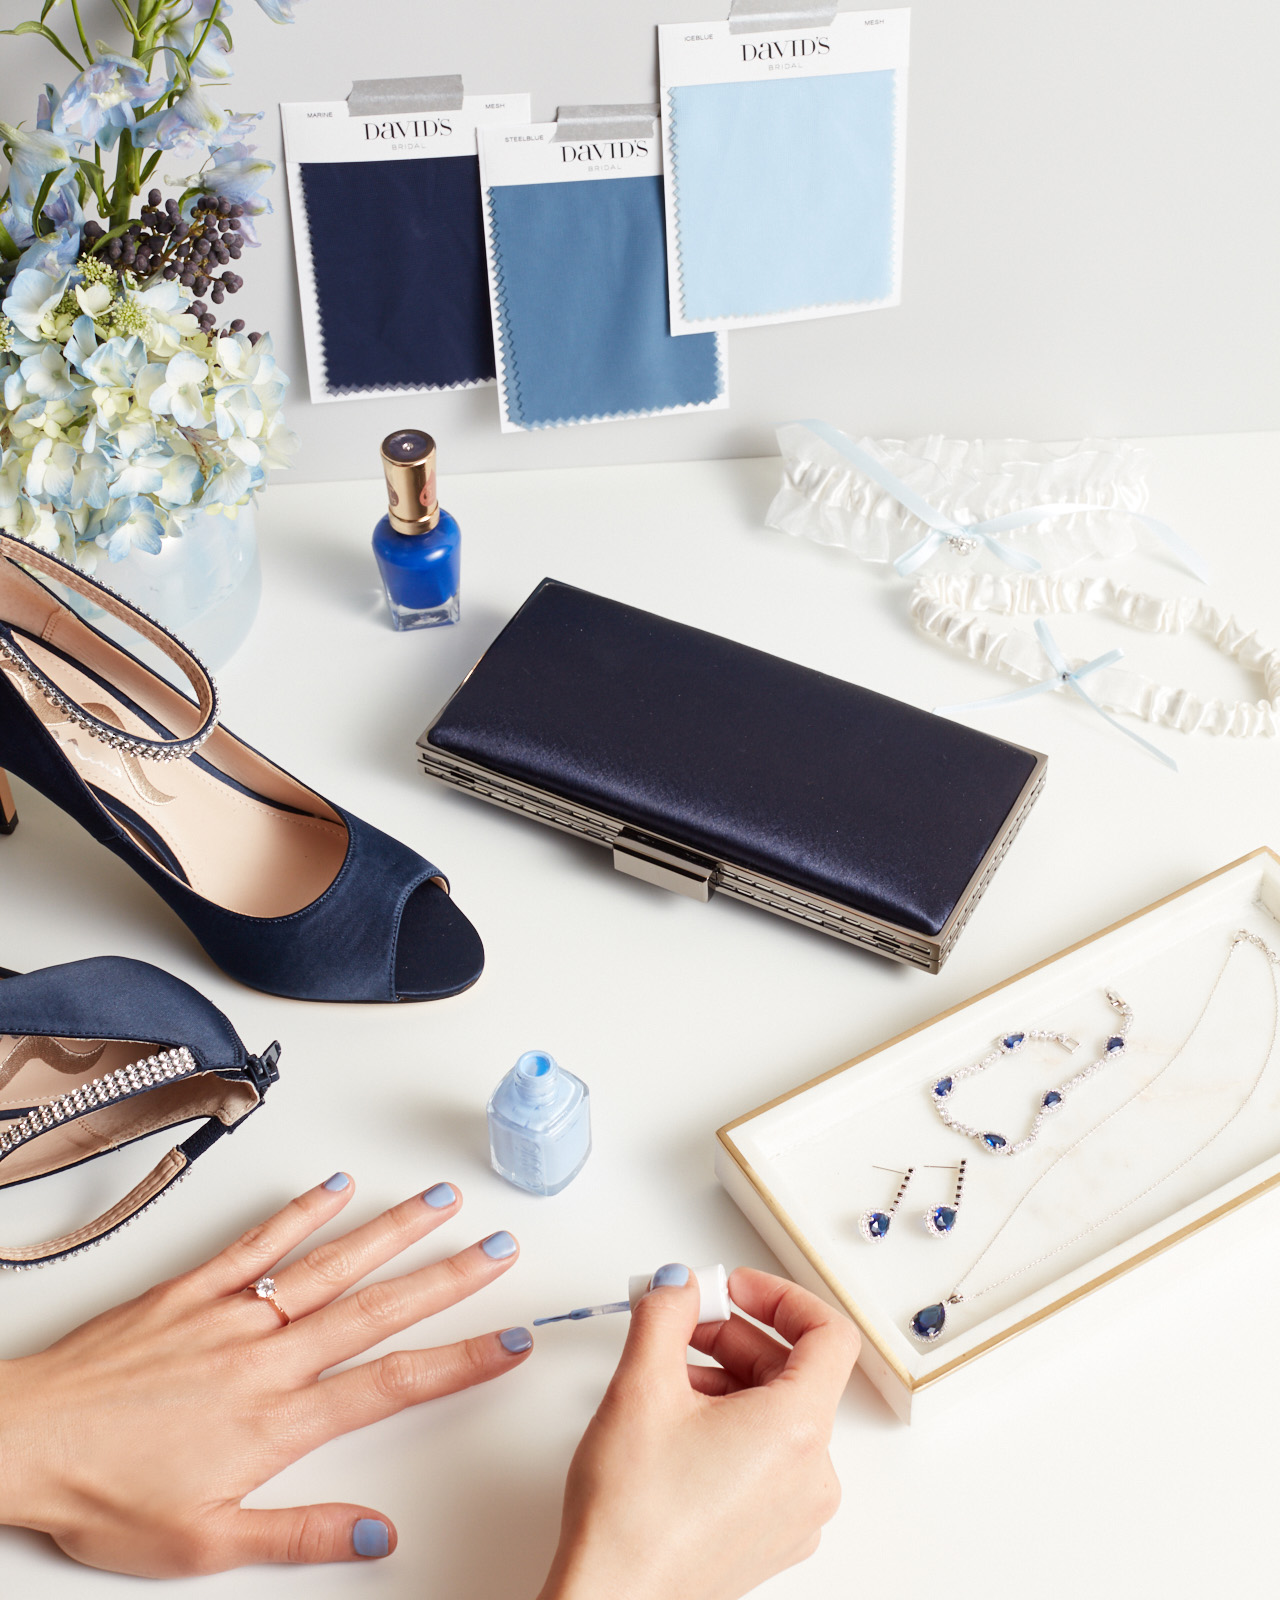 Hand being painted with light blue nail polish with blue heels, handbag, and jewelry on table.